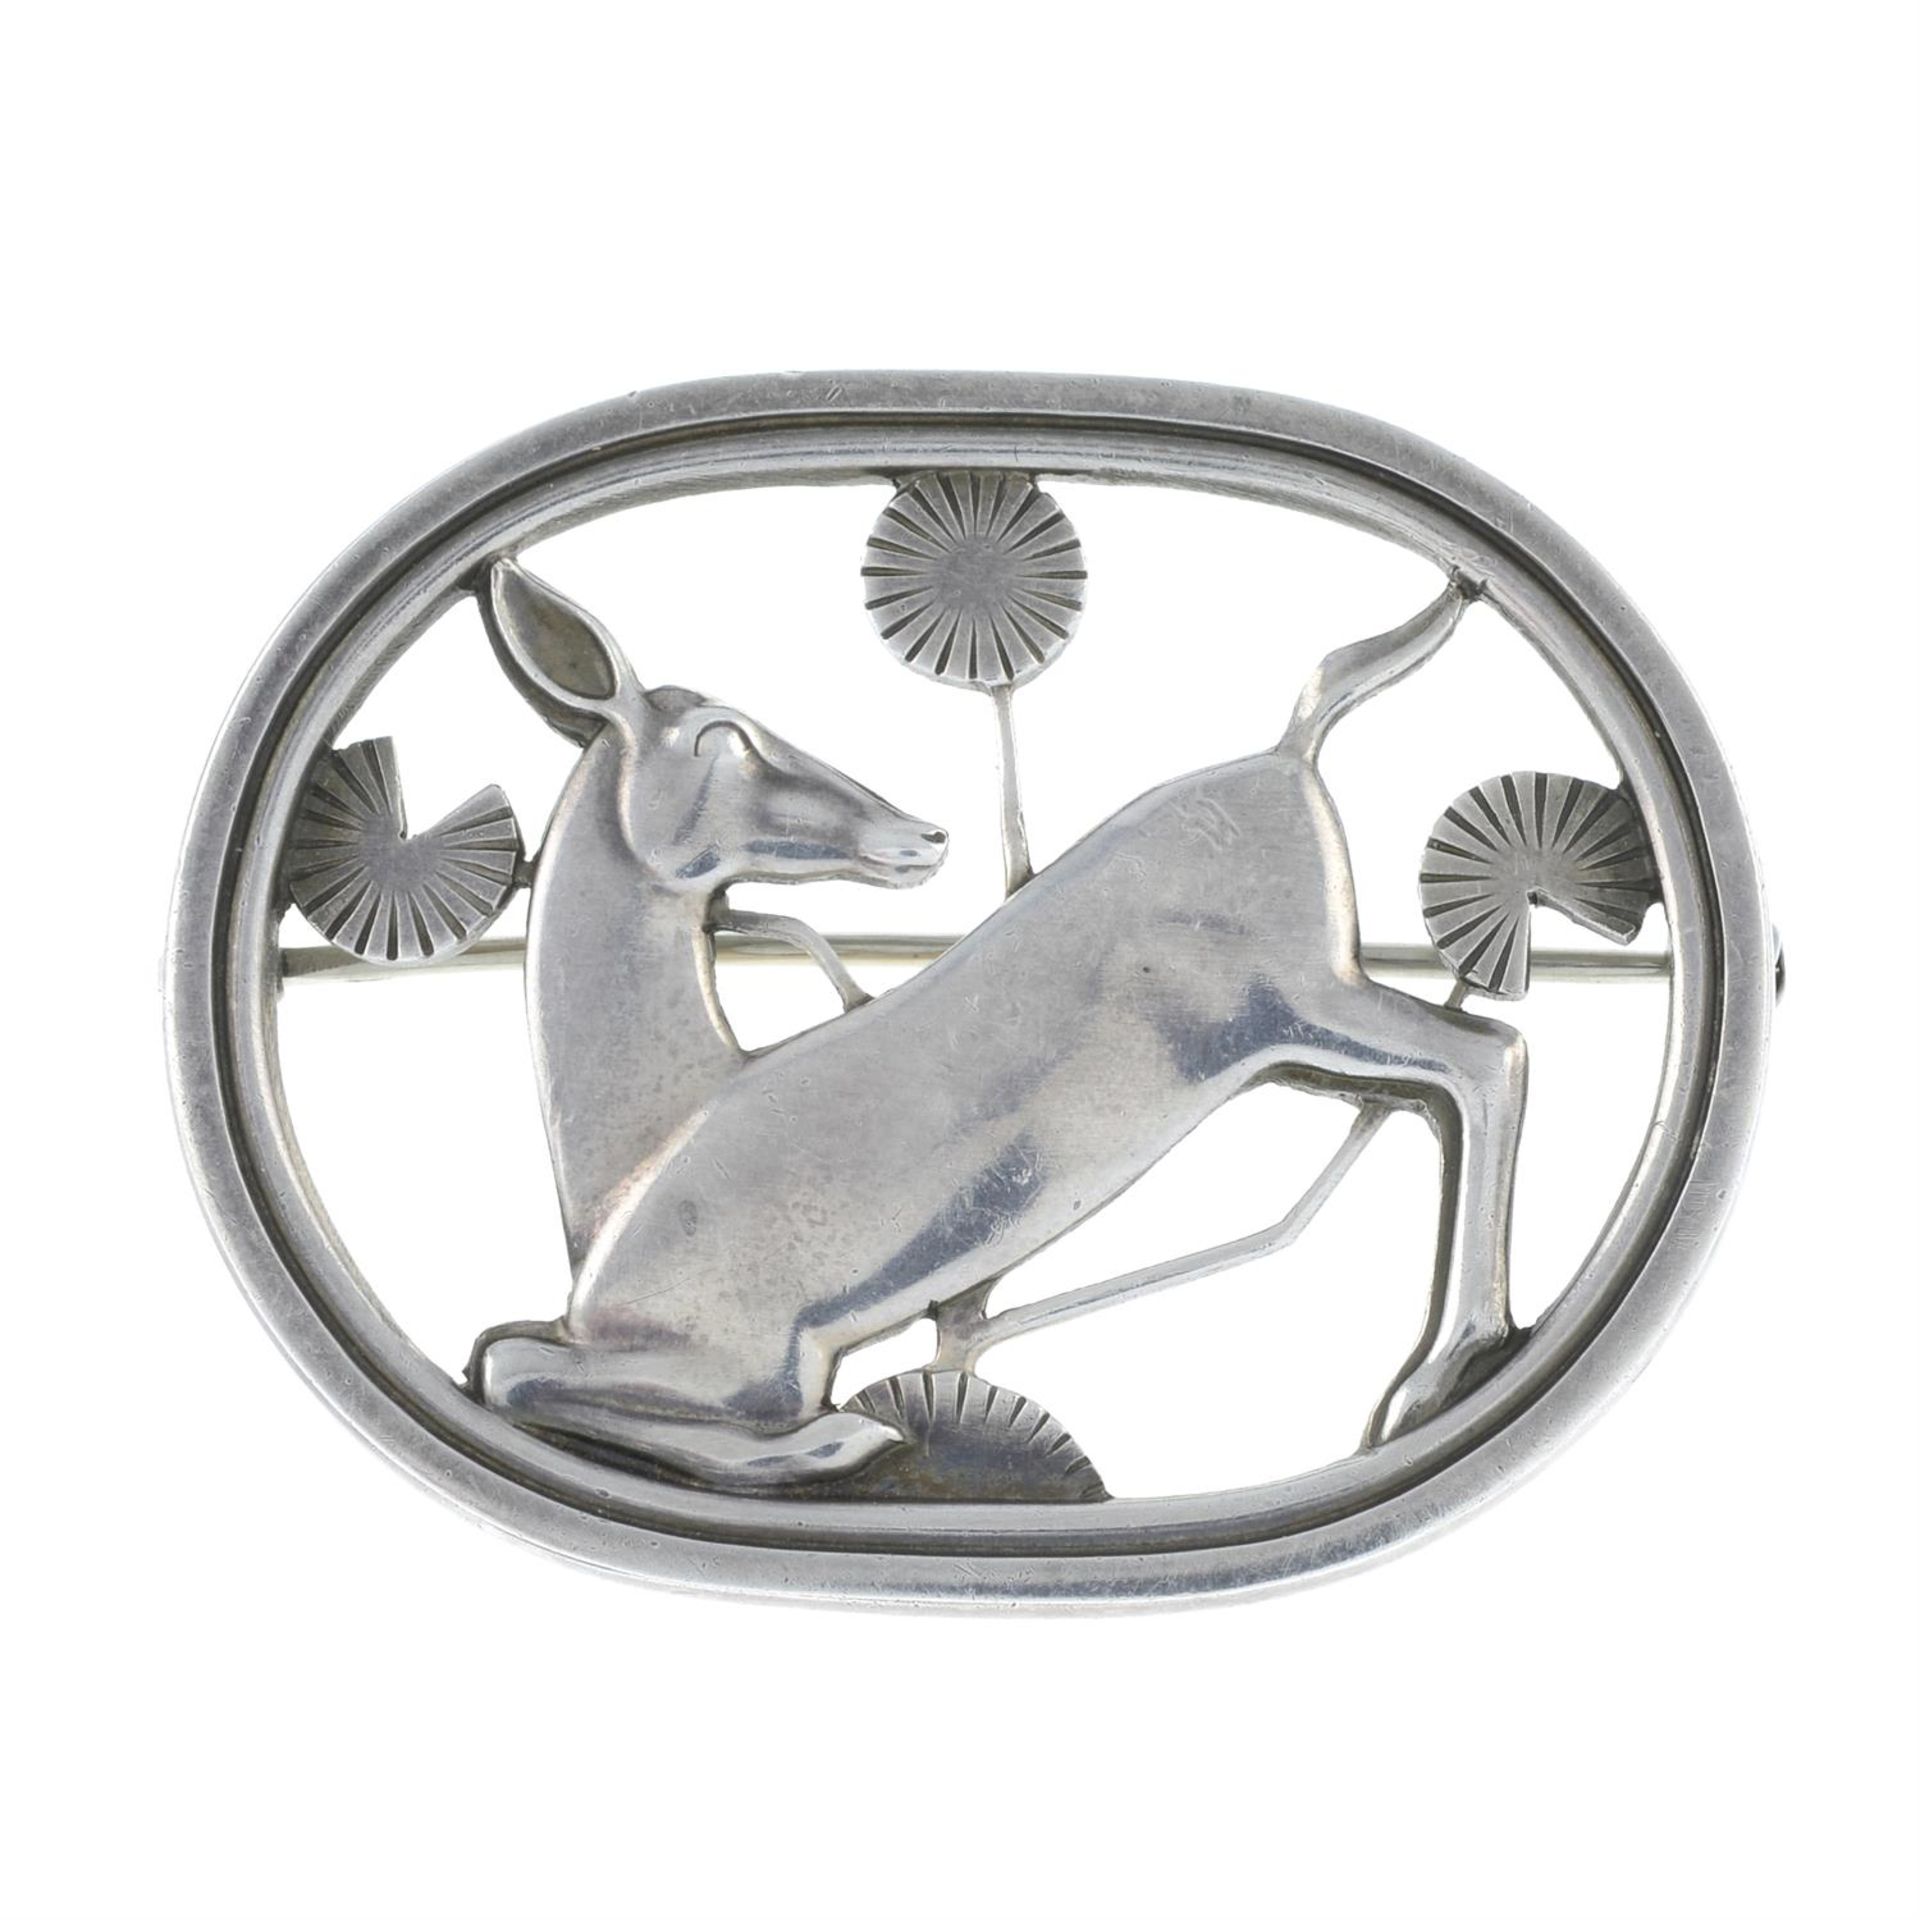 A 1980s silver deer and foliated brooch, by Arno Malinowski for Georg Jensen.